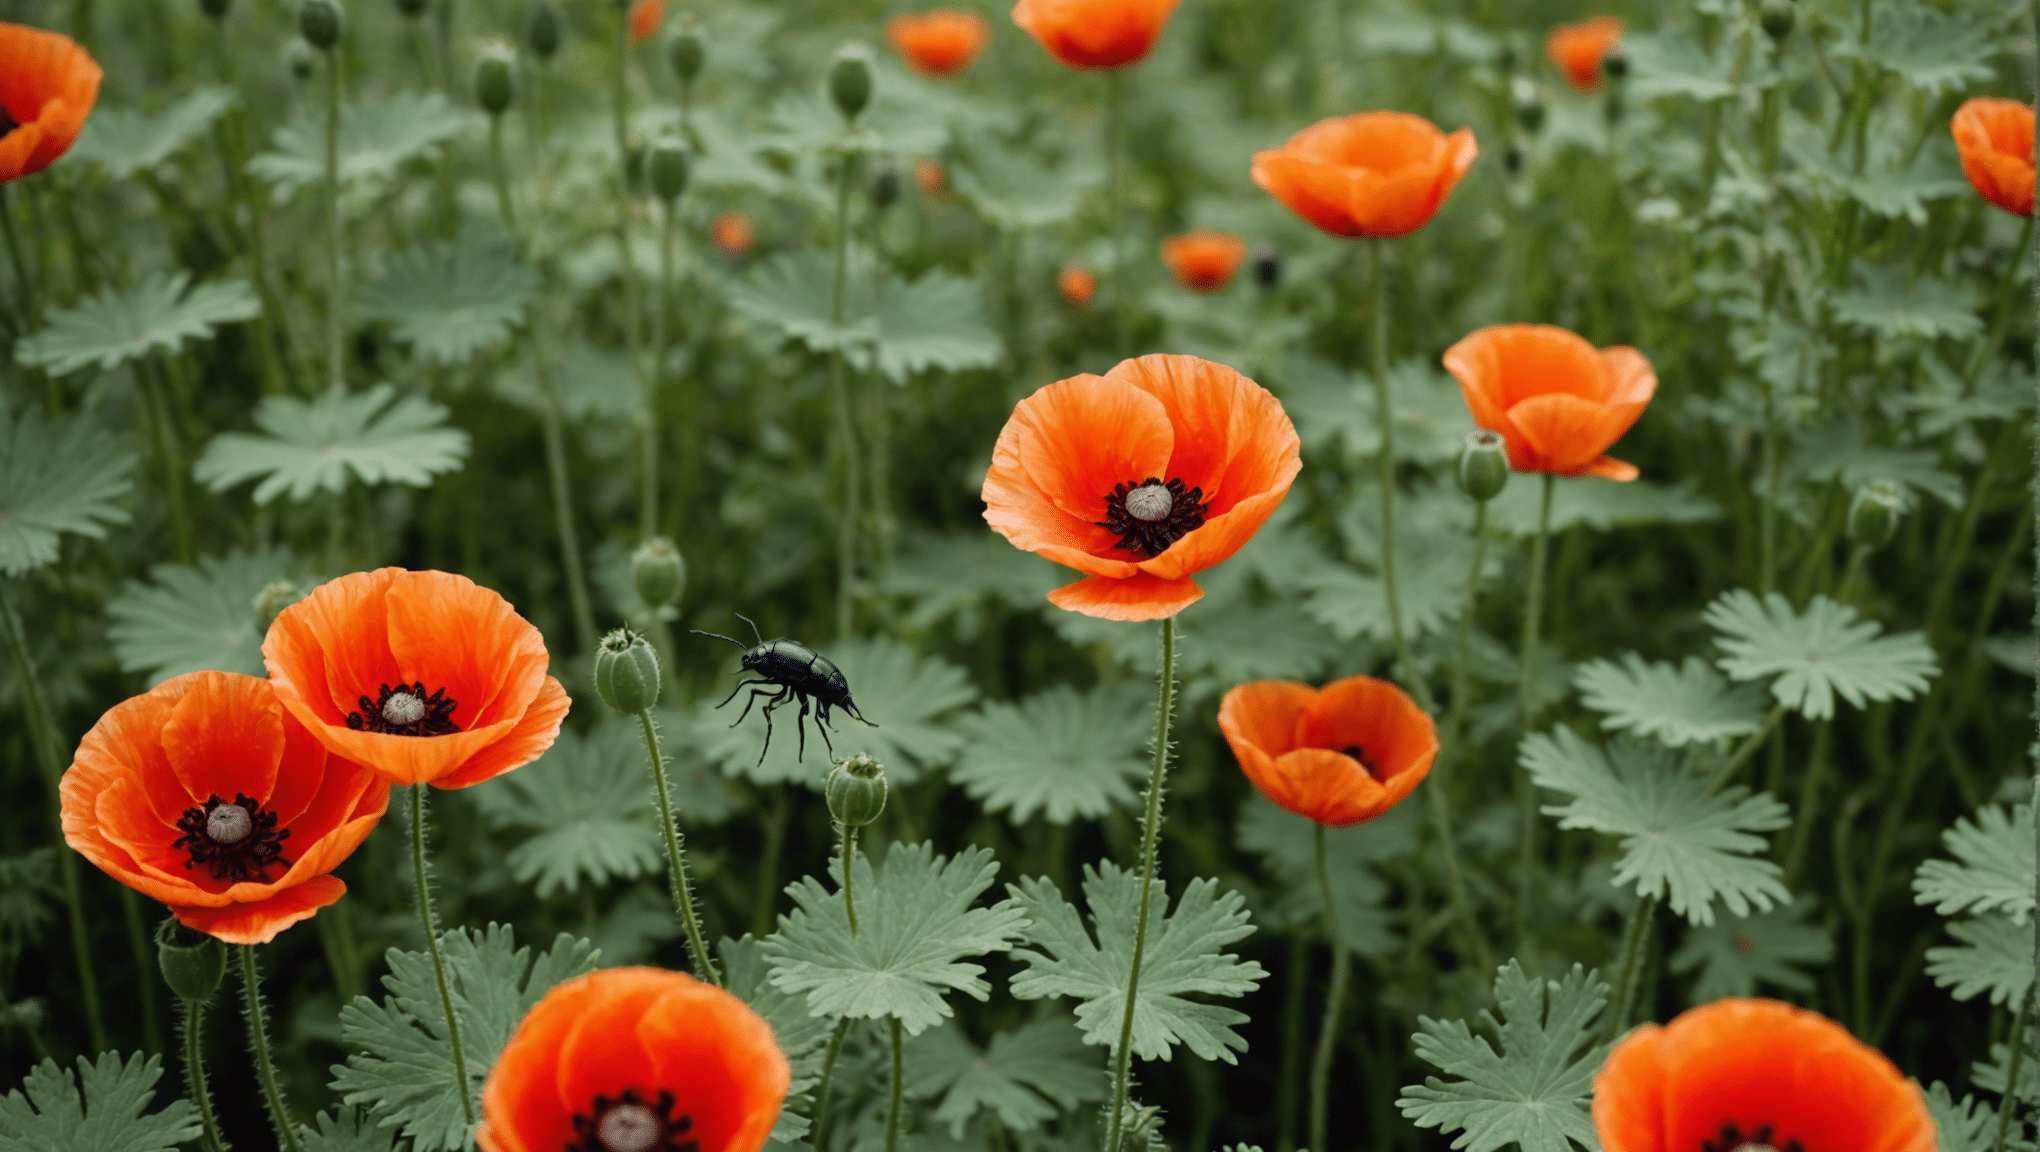 learn about the potential harm caused by tiny black bugs resembling poppy seeds